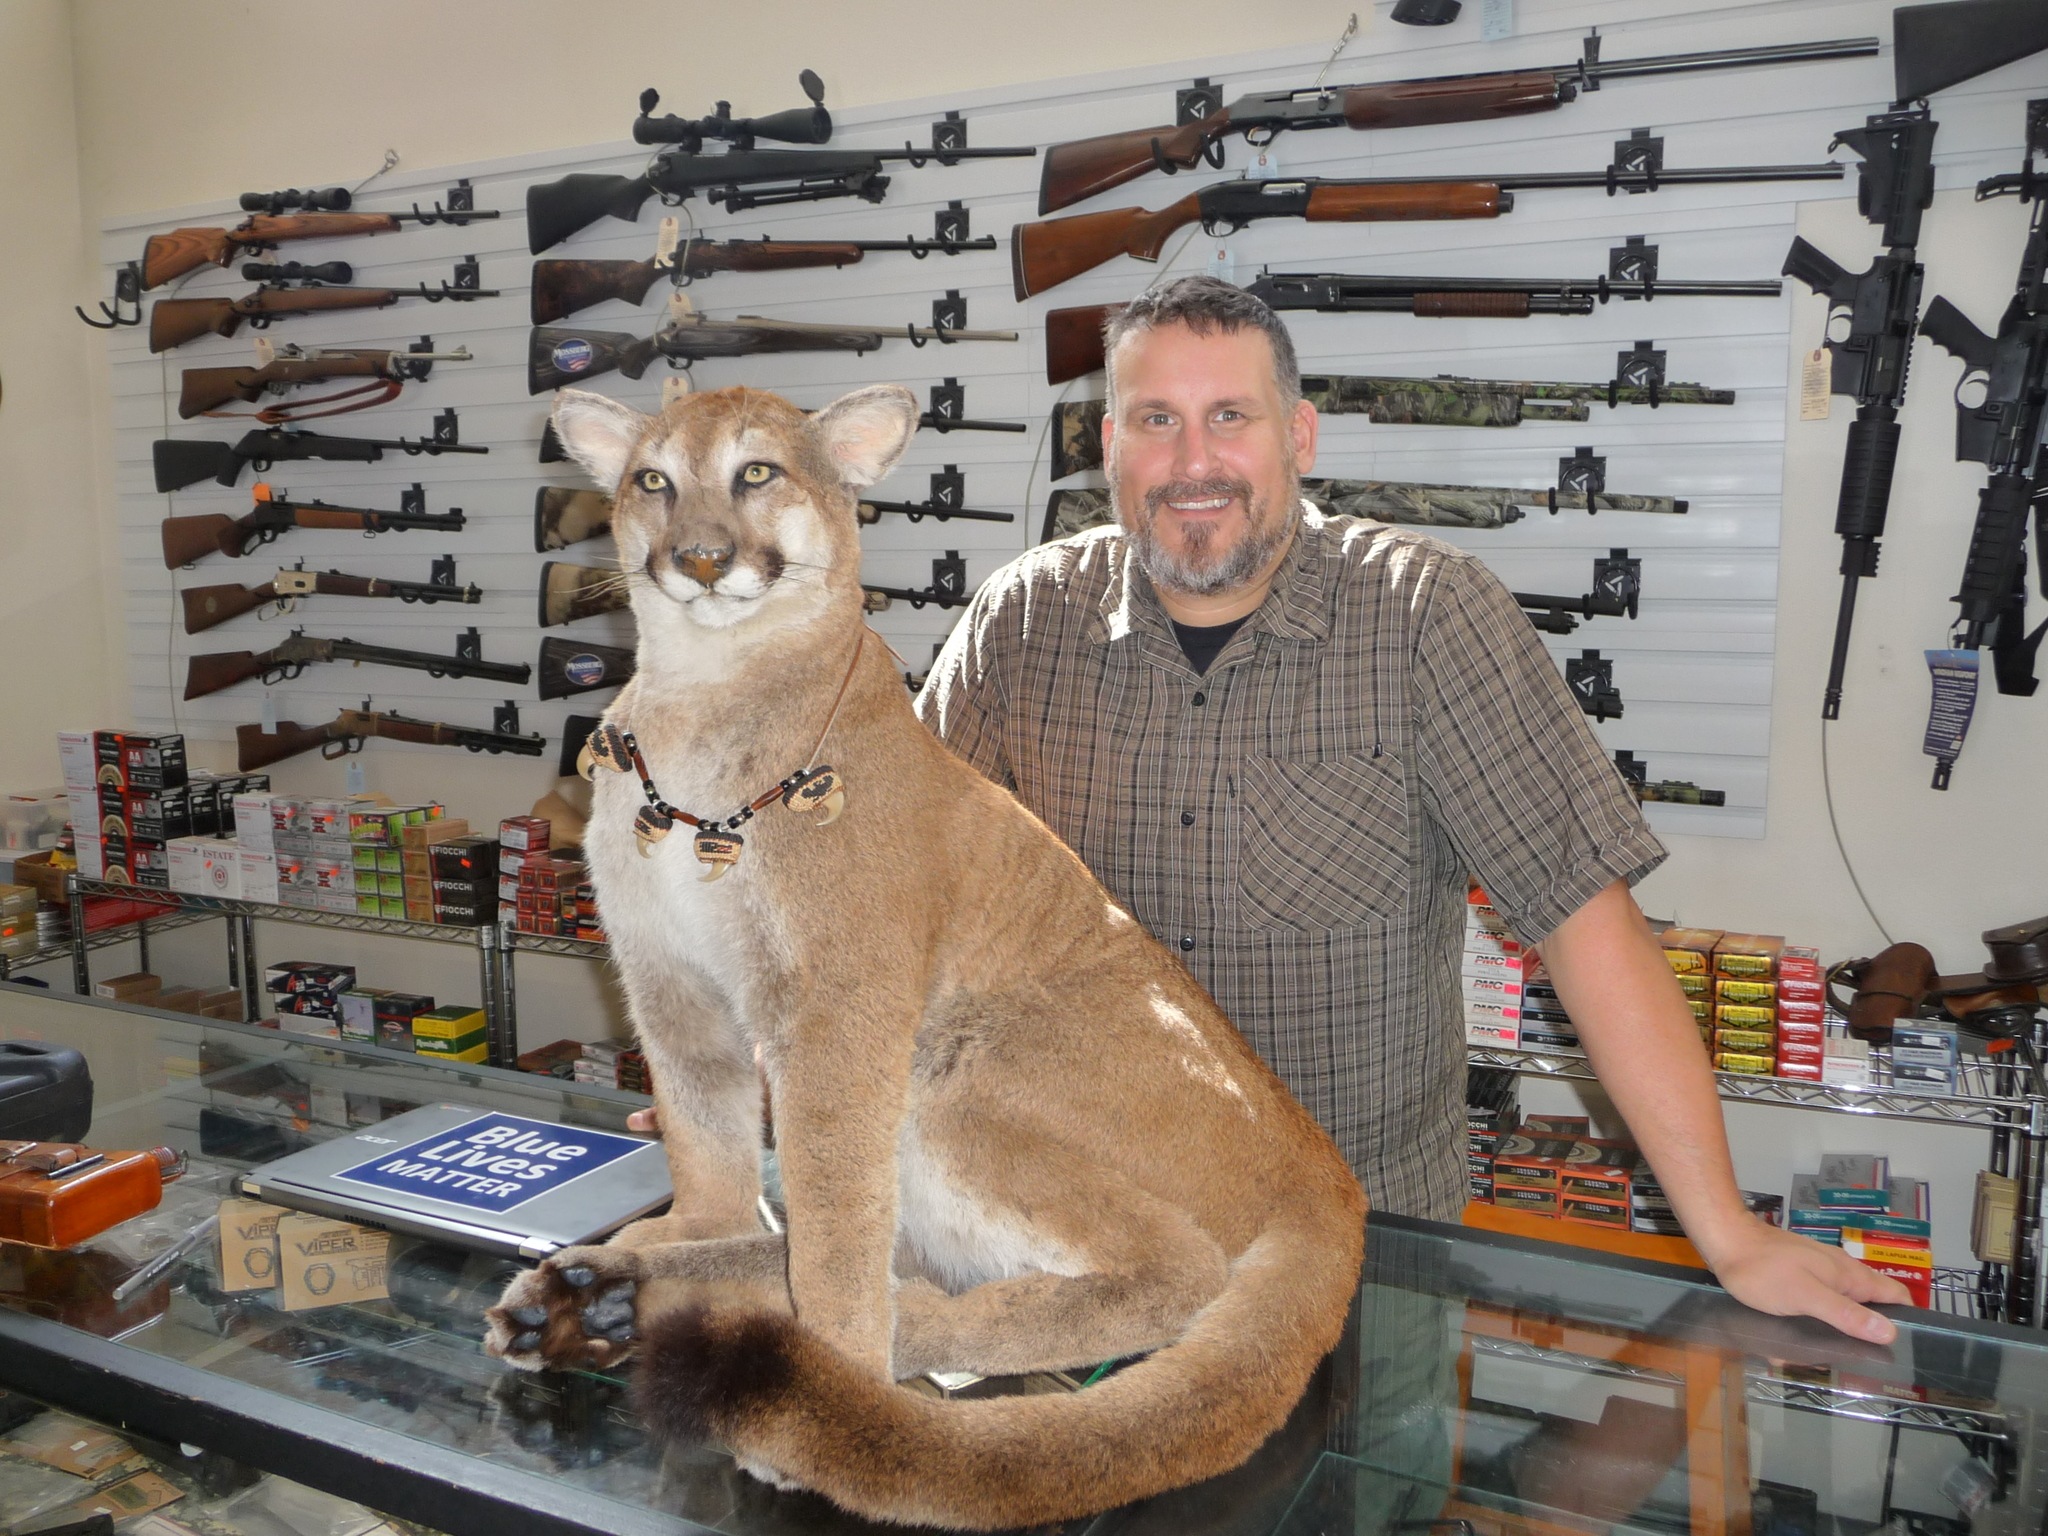 Patricia Morrison Coate/Olympic Peninsula News Group                                Seth Larson is the new owner of Freds, an emergency supplies and gun store in Sequim.                                Patricia Morrison Coate/Olympic Peninsula News Group                                Seth Larson is the new owner of Freds, an emergency supplies and gun store in Sequim.